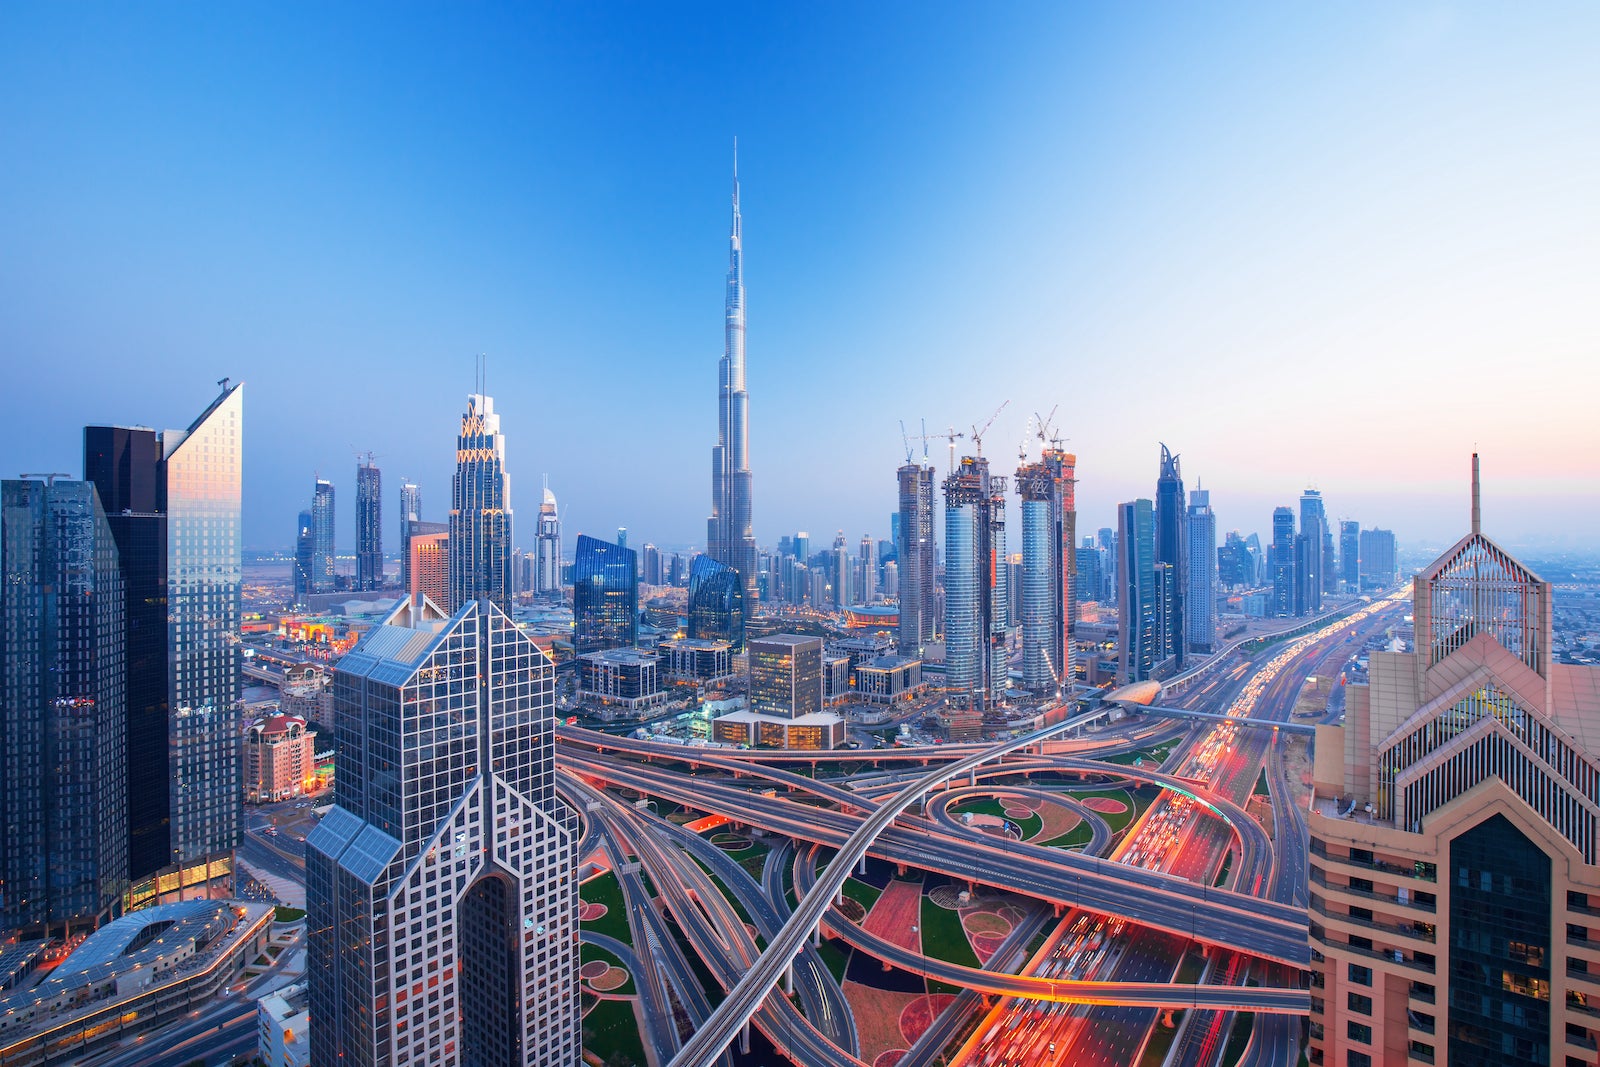 sunset view of the Dubai skyline with large interstate system